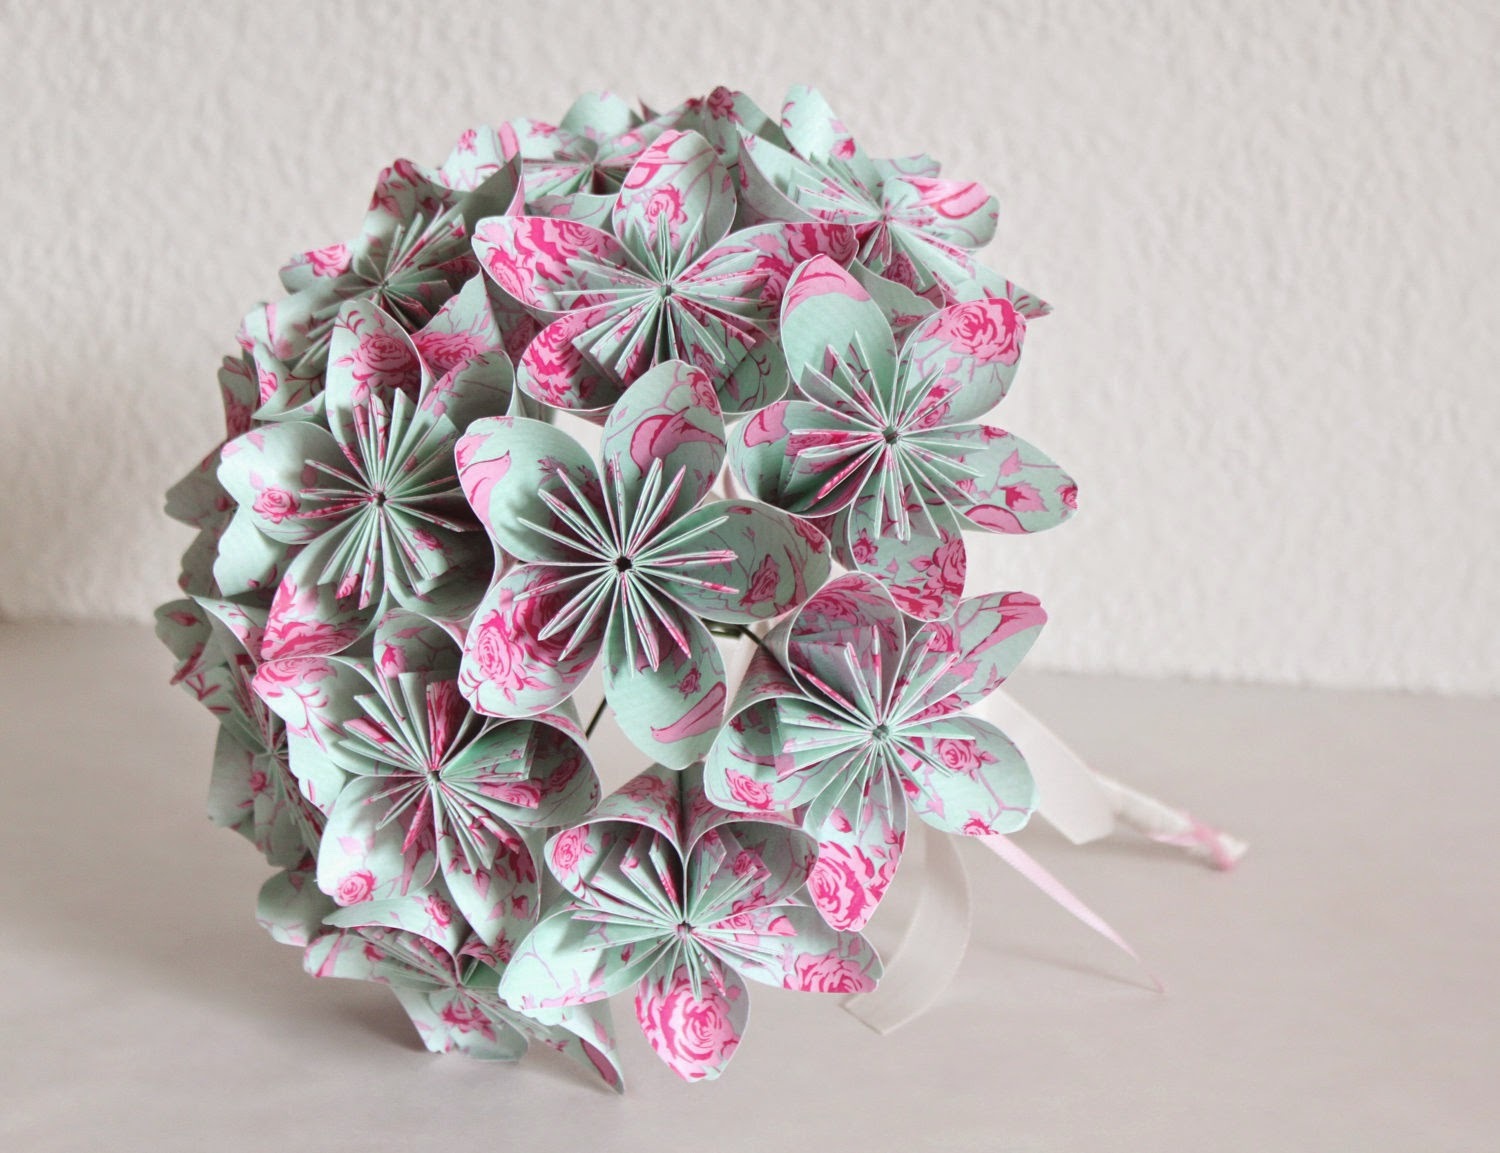 3D Origami Flower Origami Flower Bouquet Photo 3d Origami For Kids